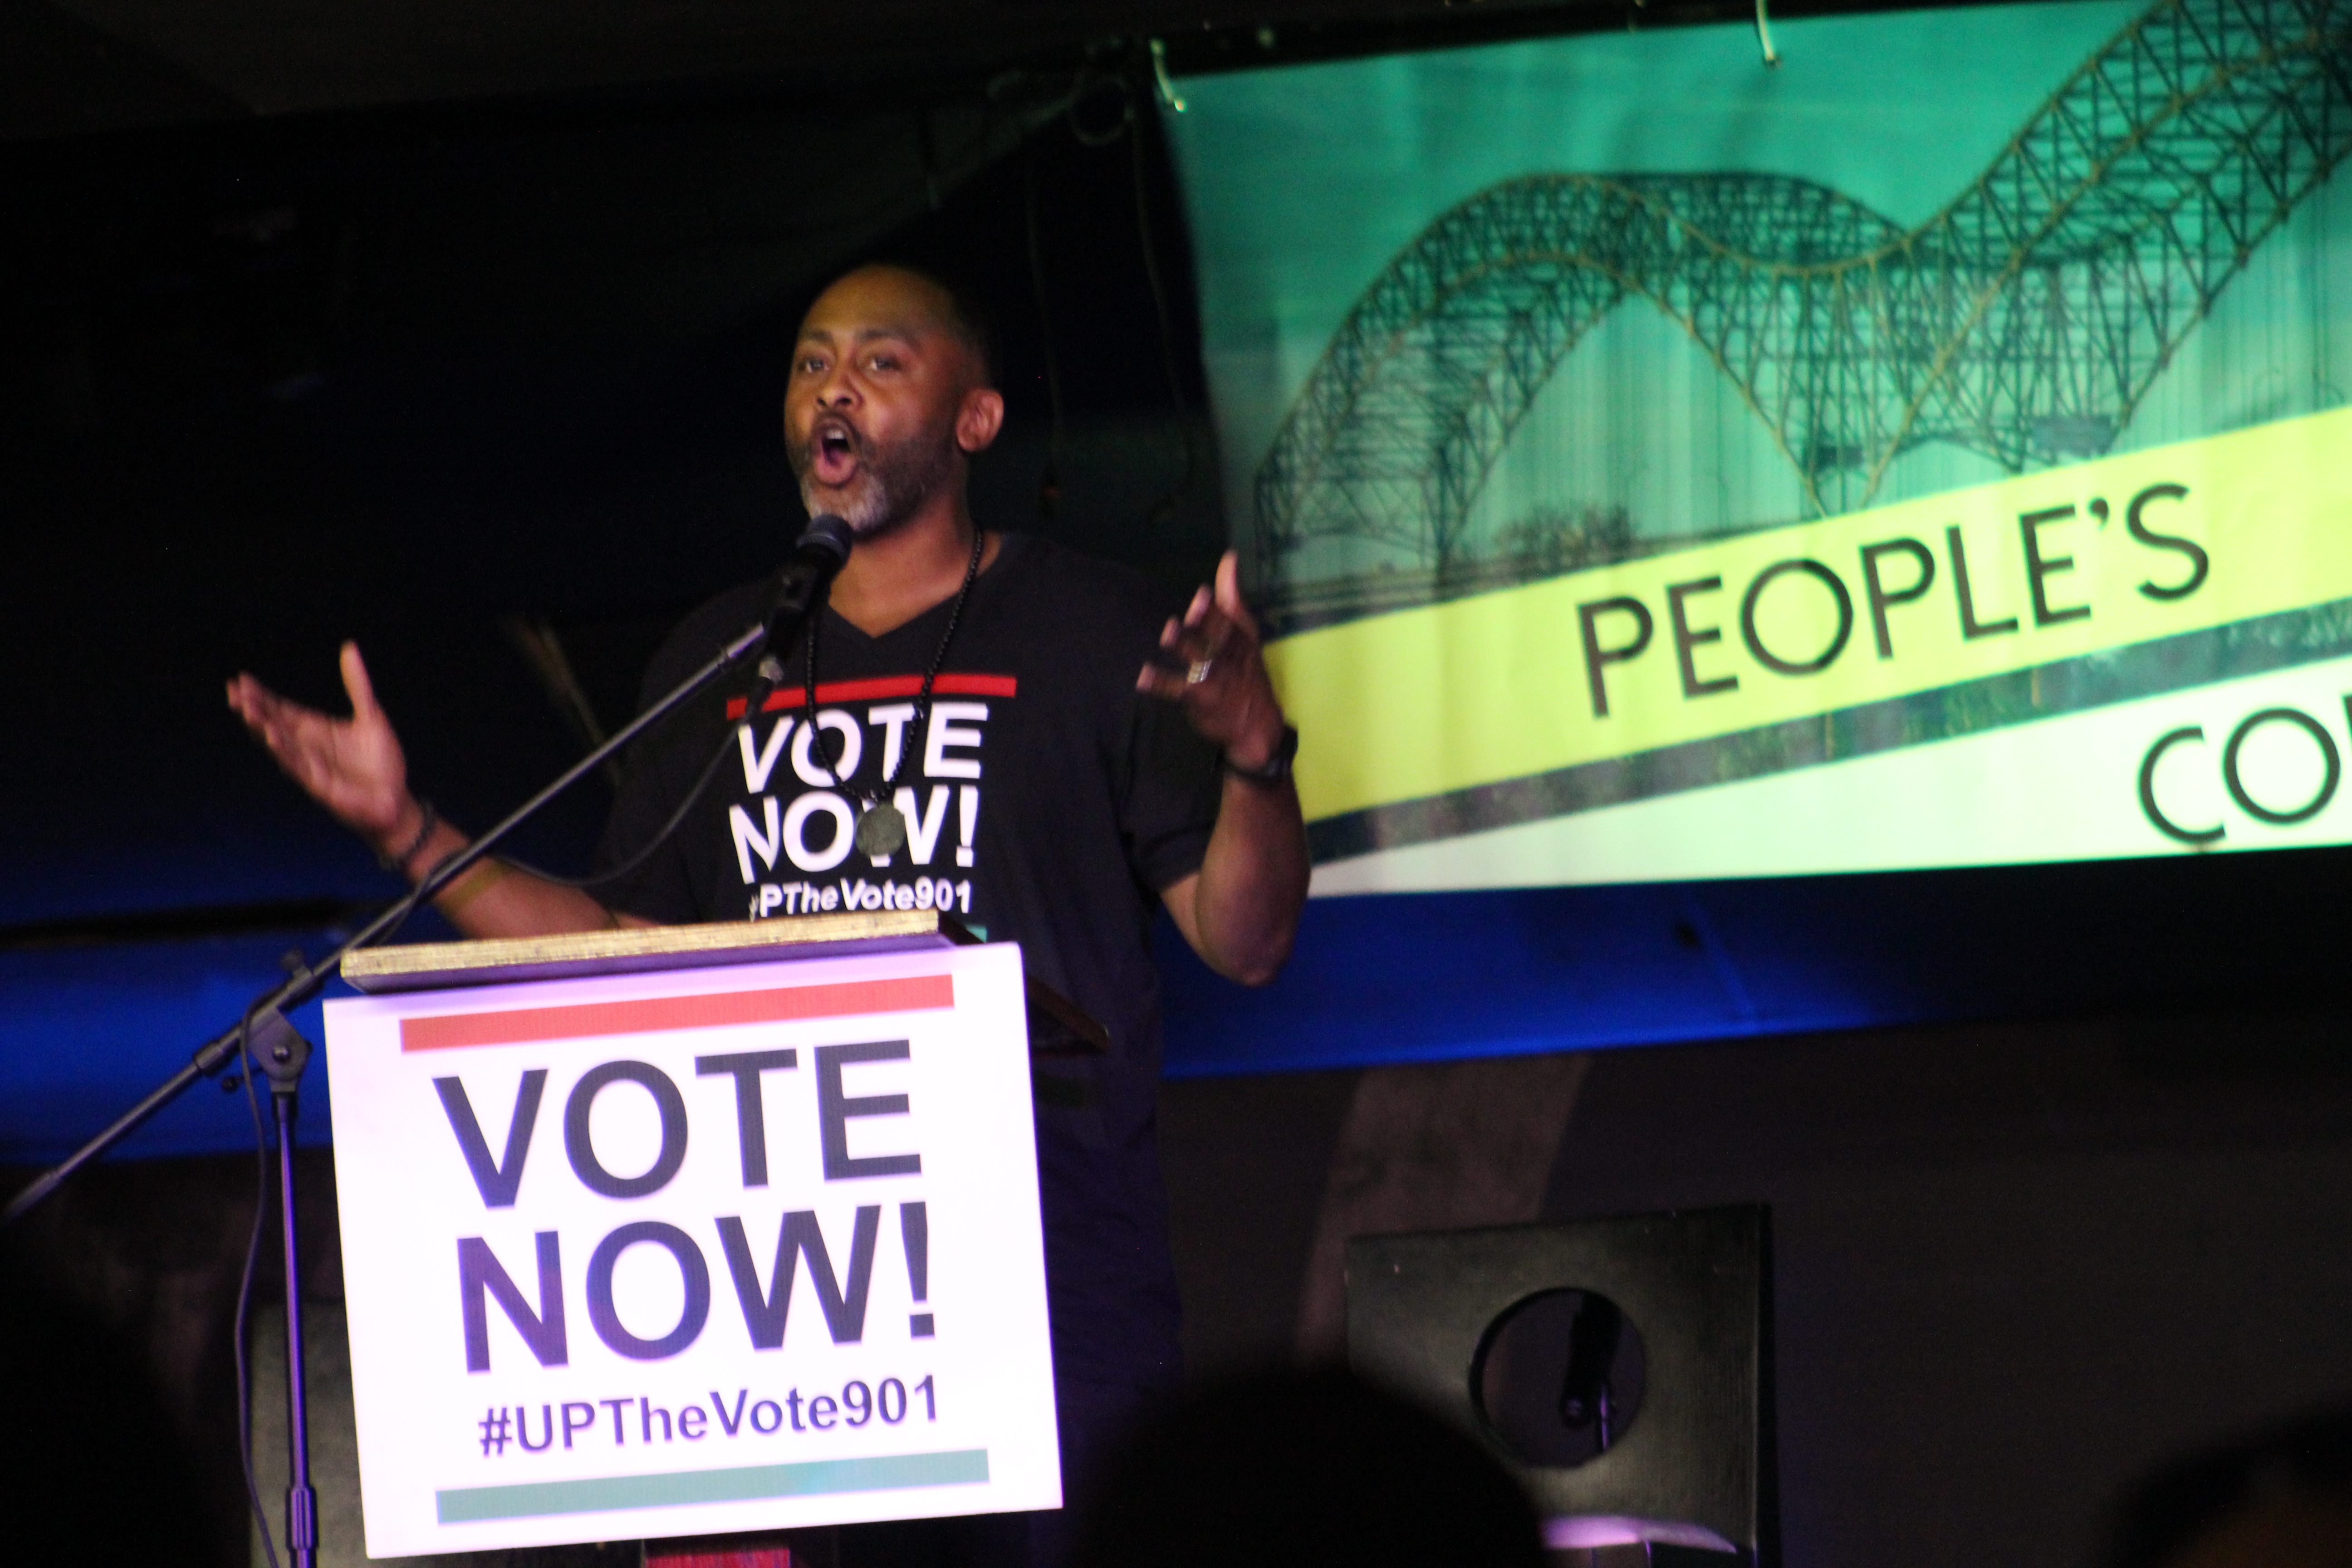 Rev. Dr. Earle Fisher, founder of #UPTheVote901, offers opening remarks at The People's Convention at the Paradise Entertainment Complex on Saturday, June 8. (Photo: Lee Eric Smith)